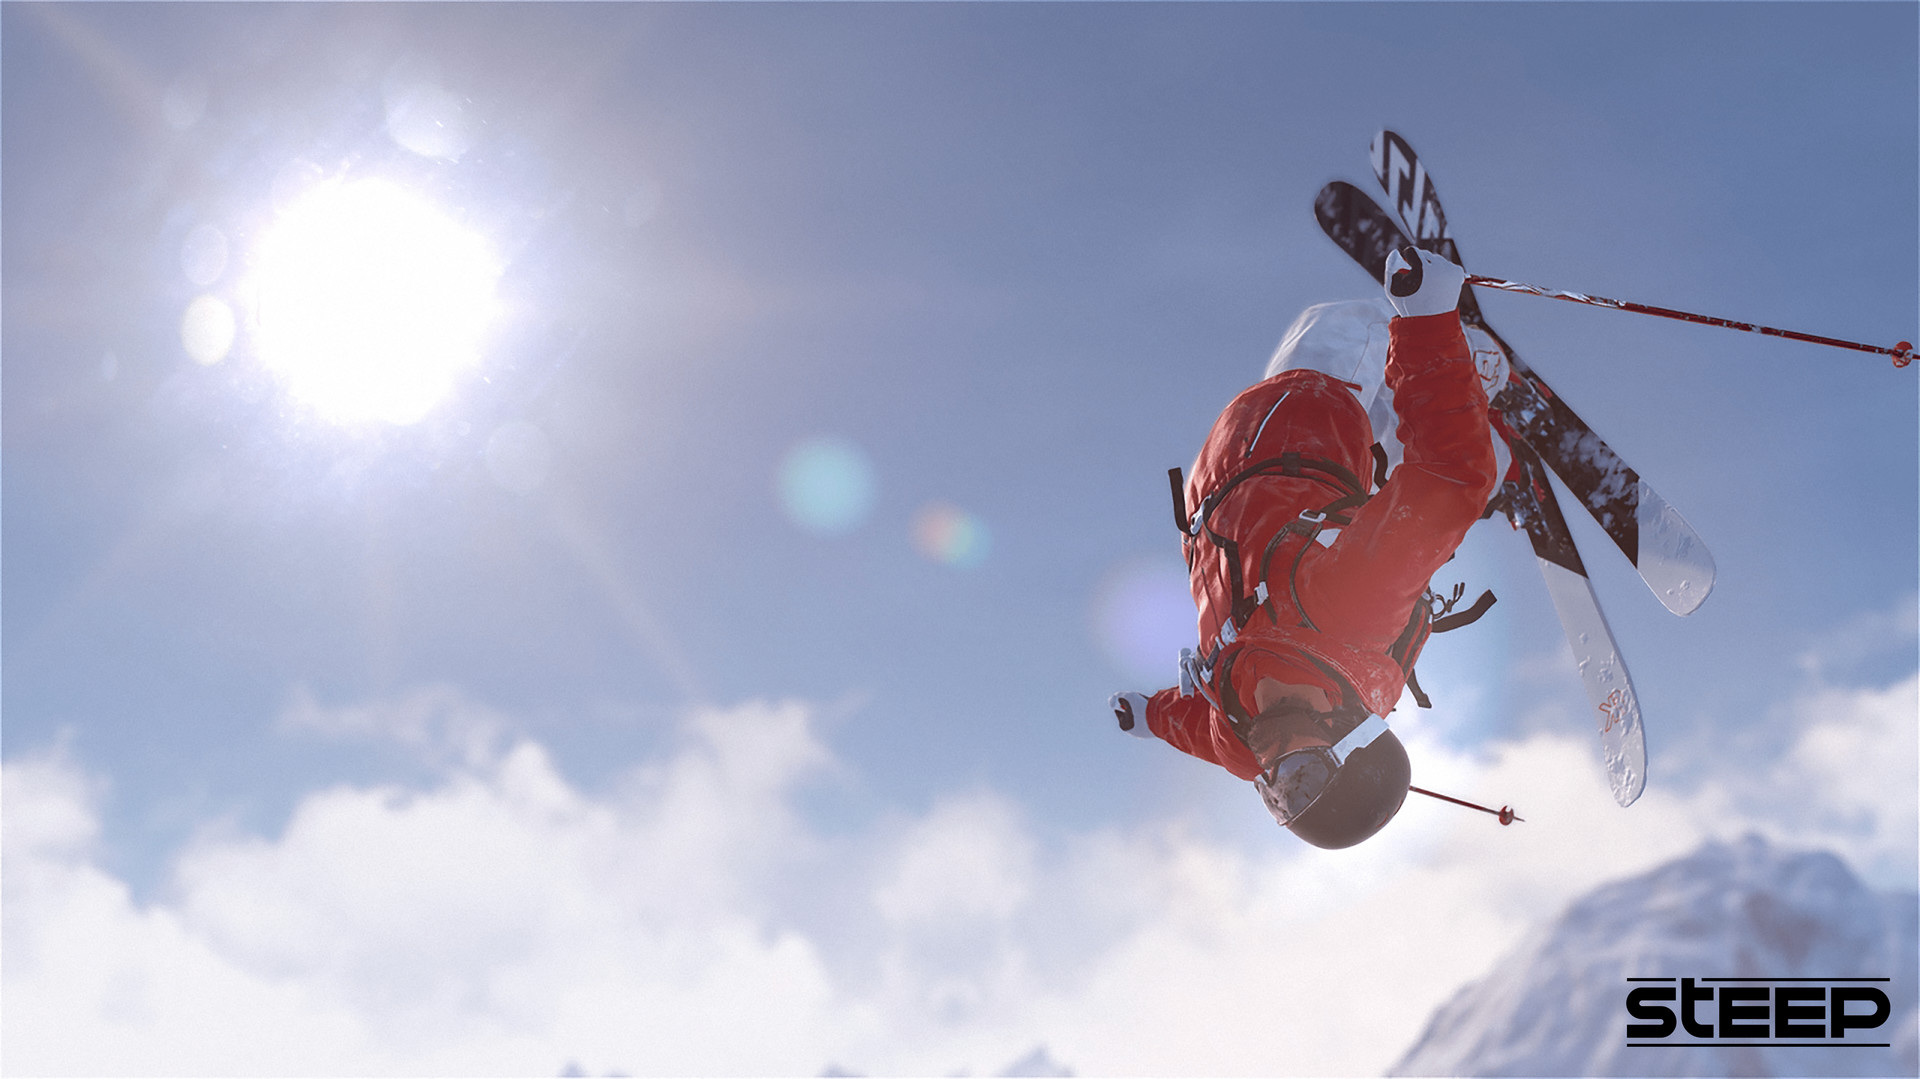 Download Steep